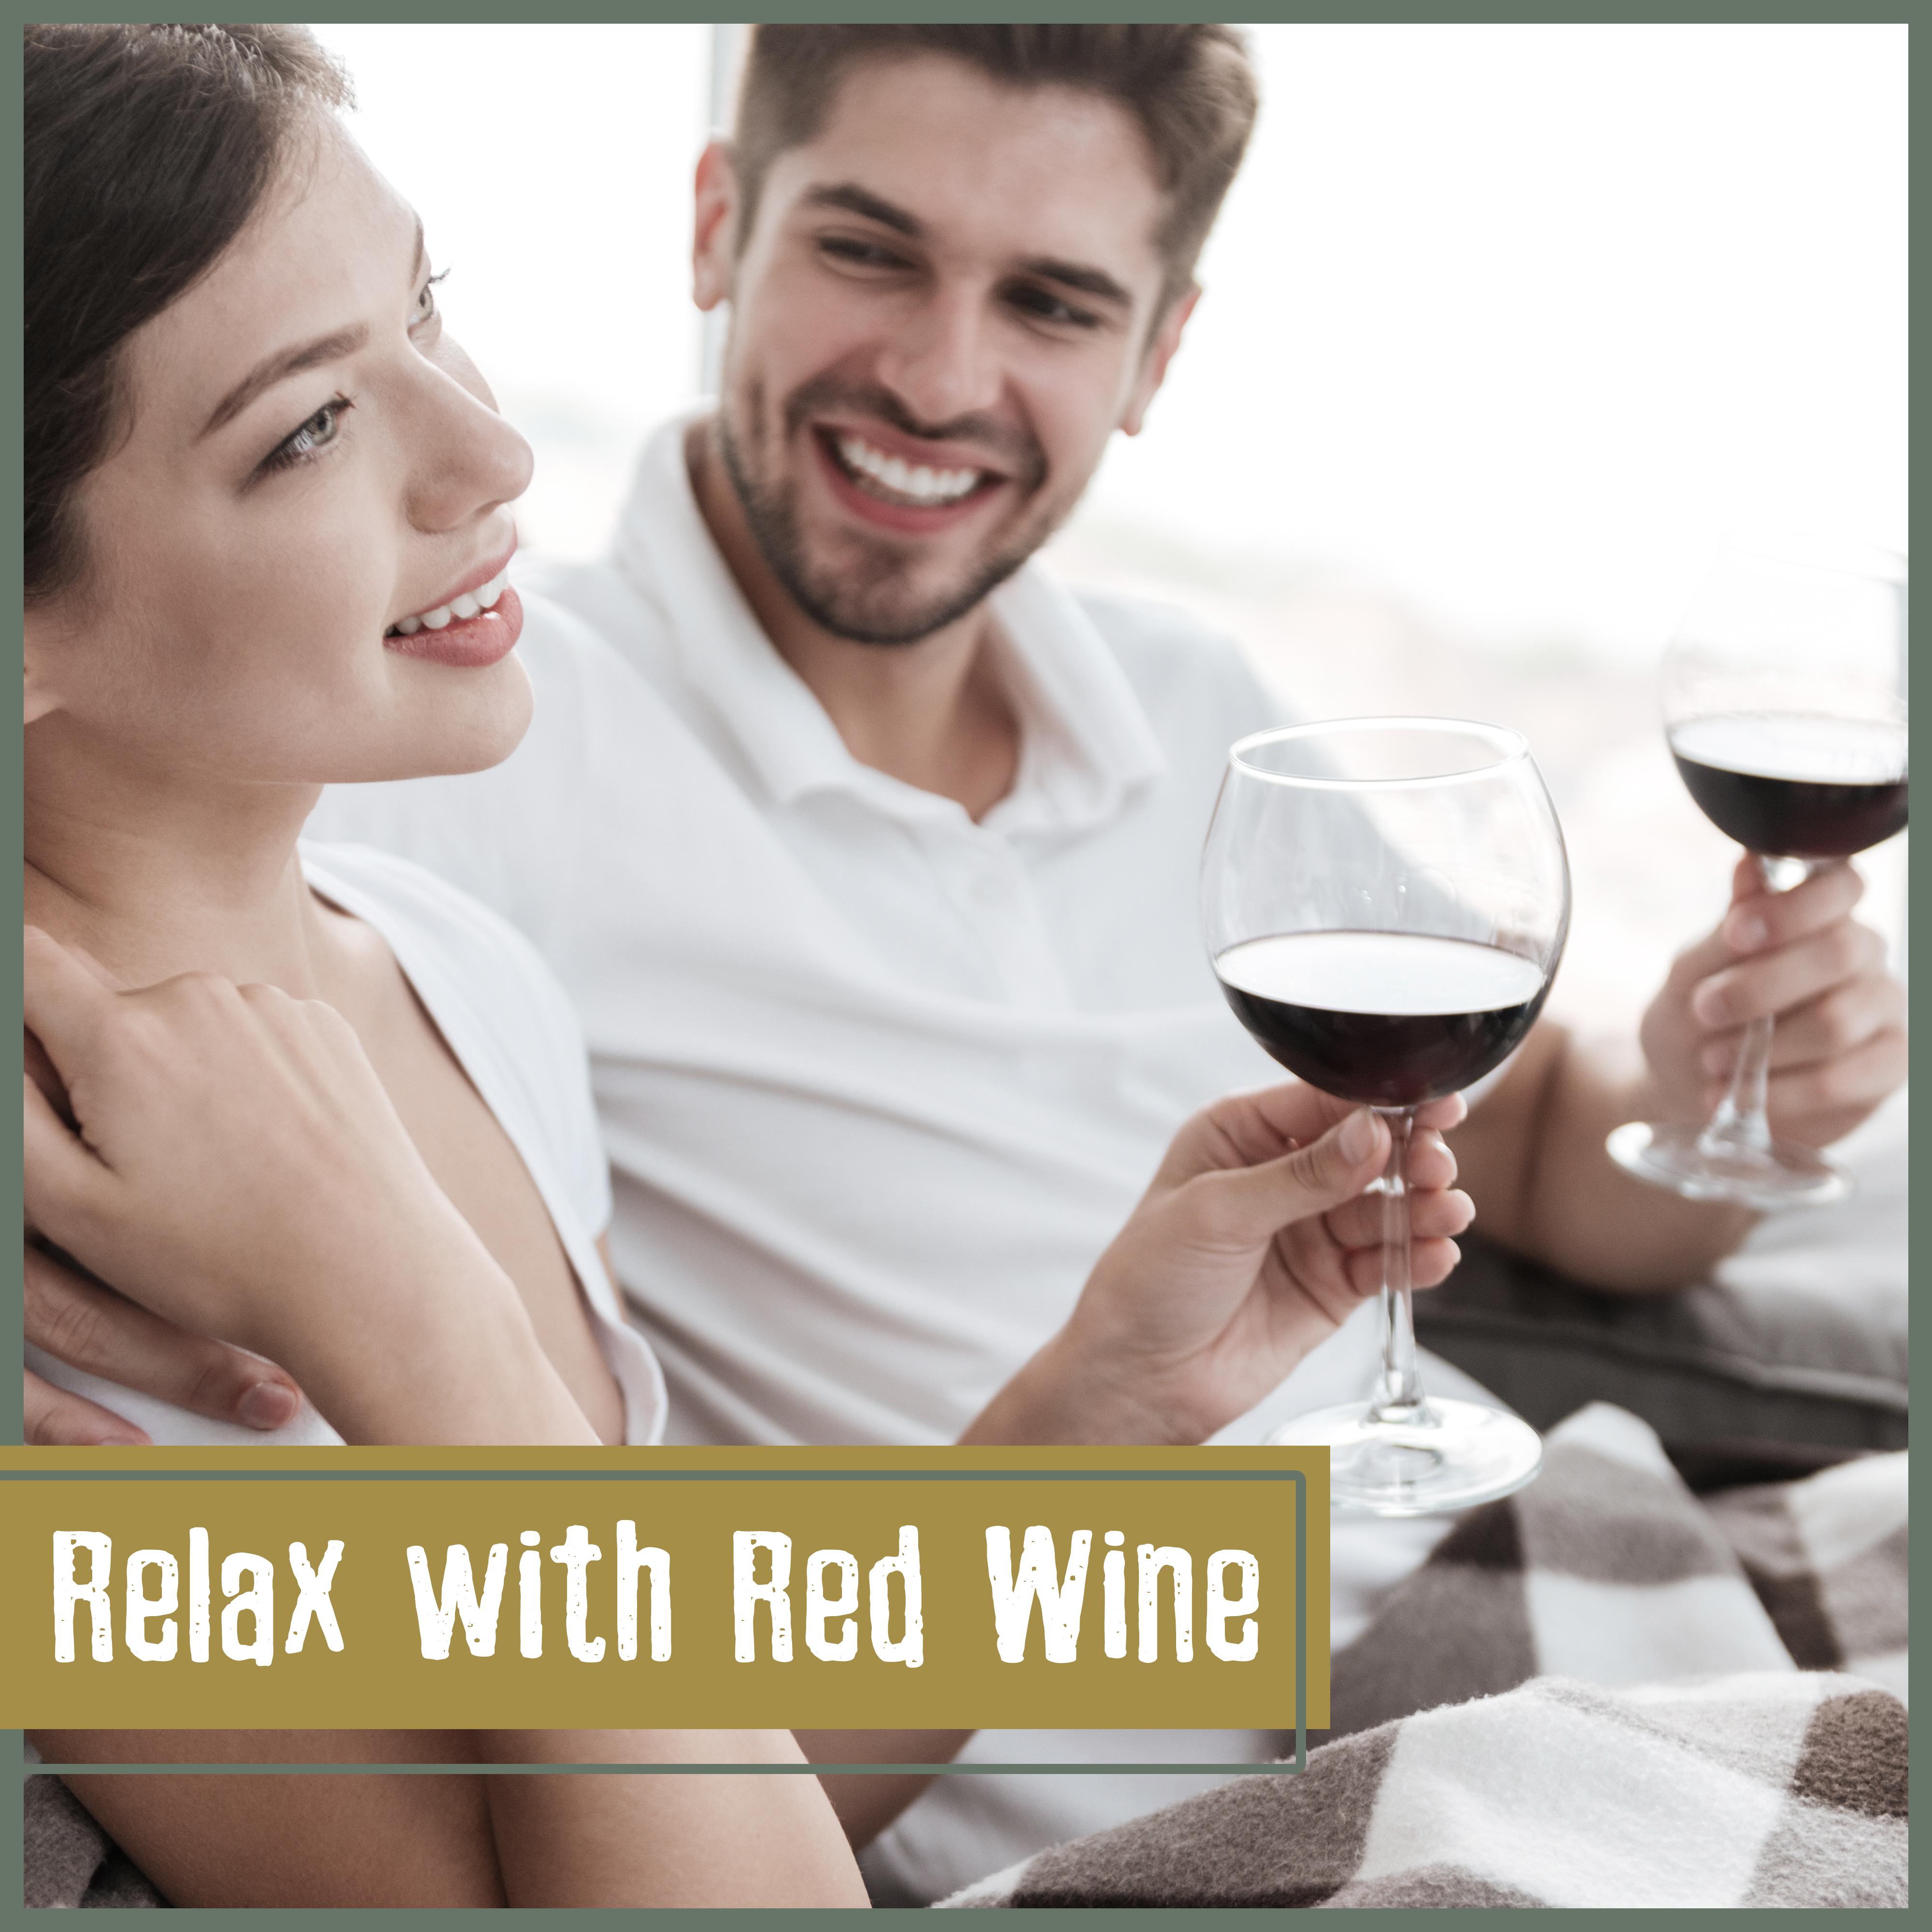 Relax with Red Wine – Instrumental Jazz Music, Chilled Time, Piano Bar, Night Sounds, Perfect Jazz at Night